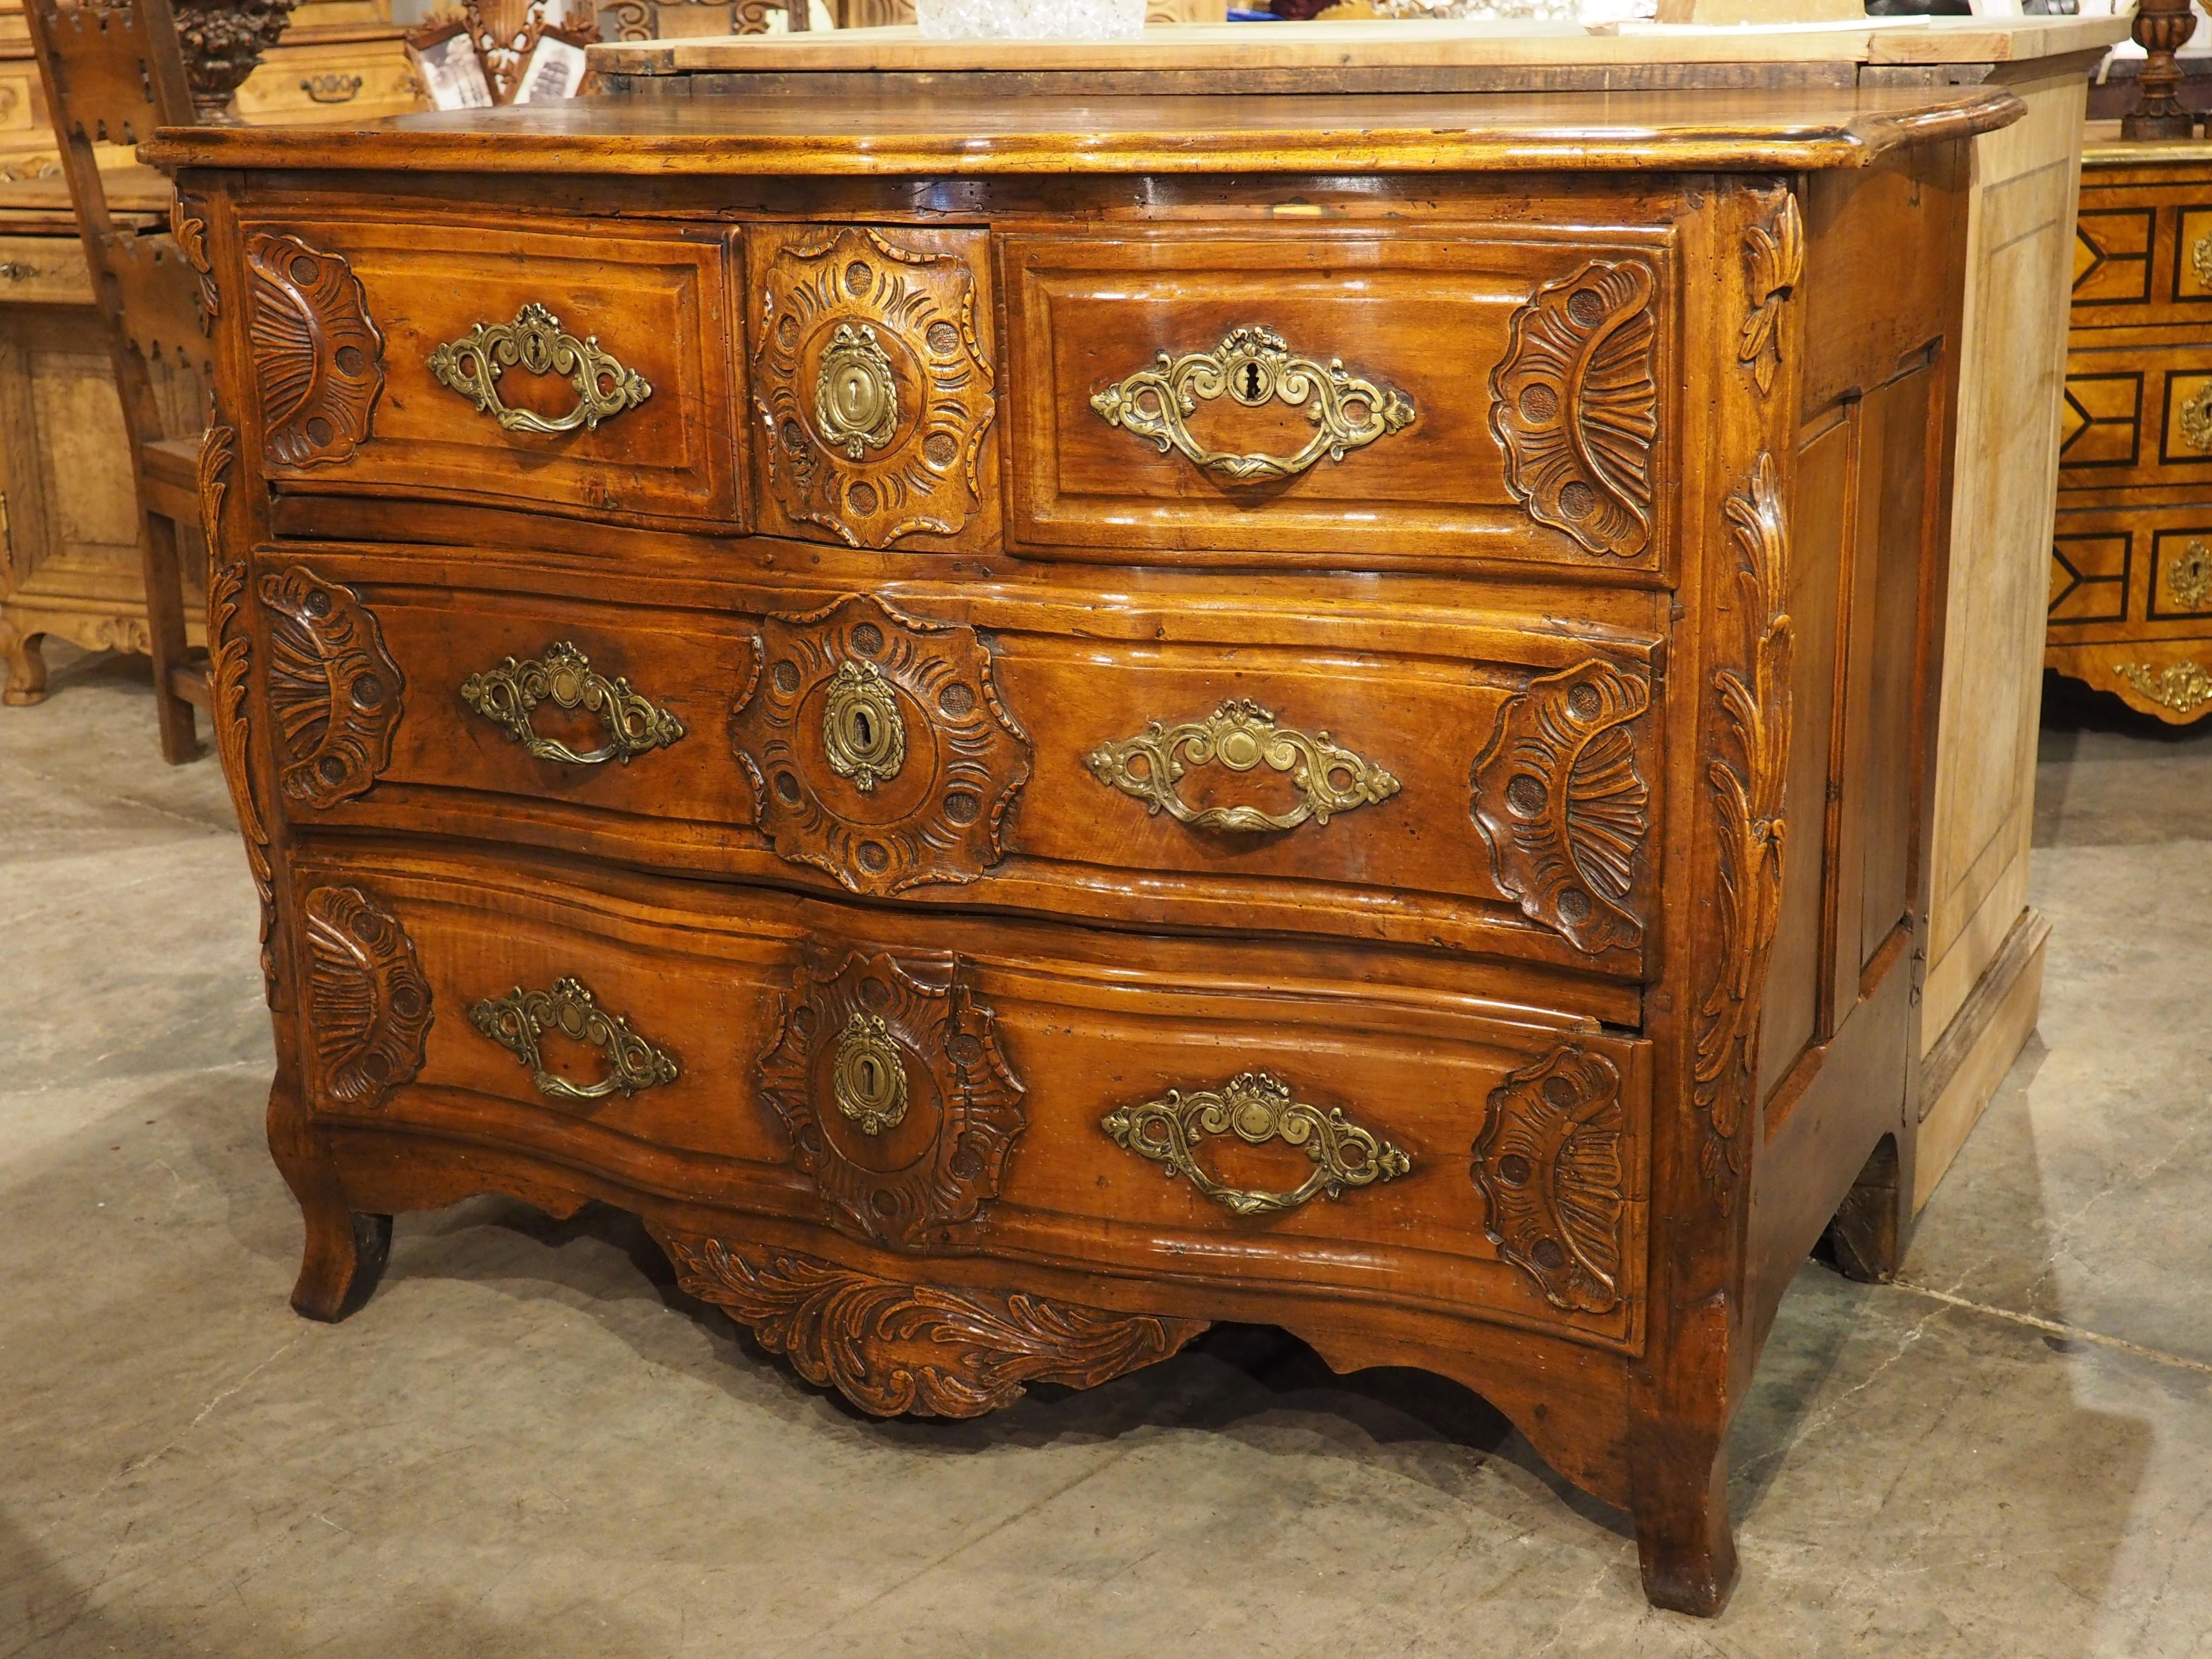 18th Century Regence Period Carved Walnut Lyonnaise Commode 'Arbalete' For Sale 13